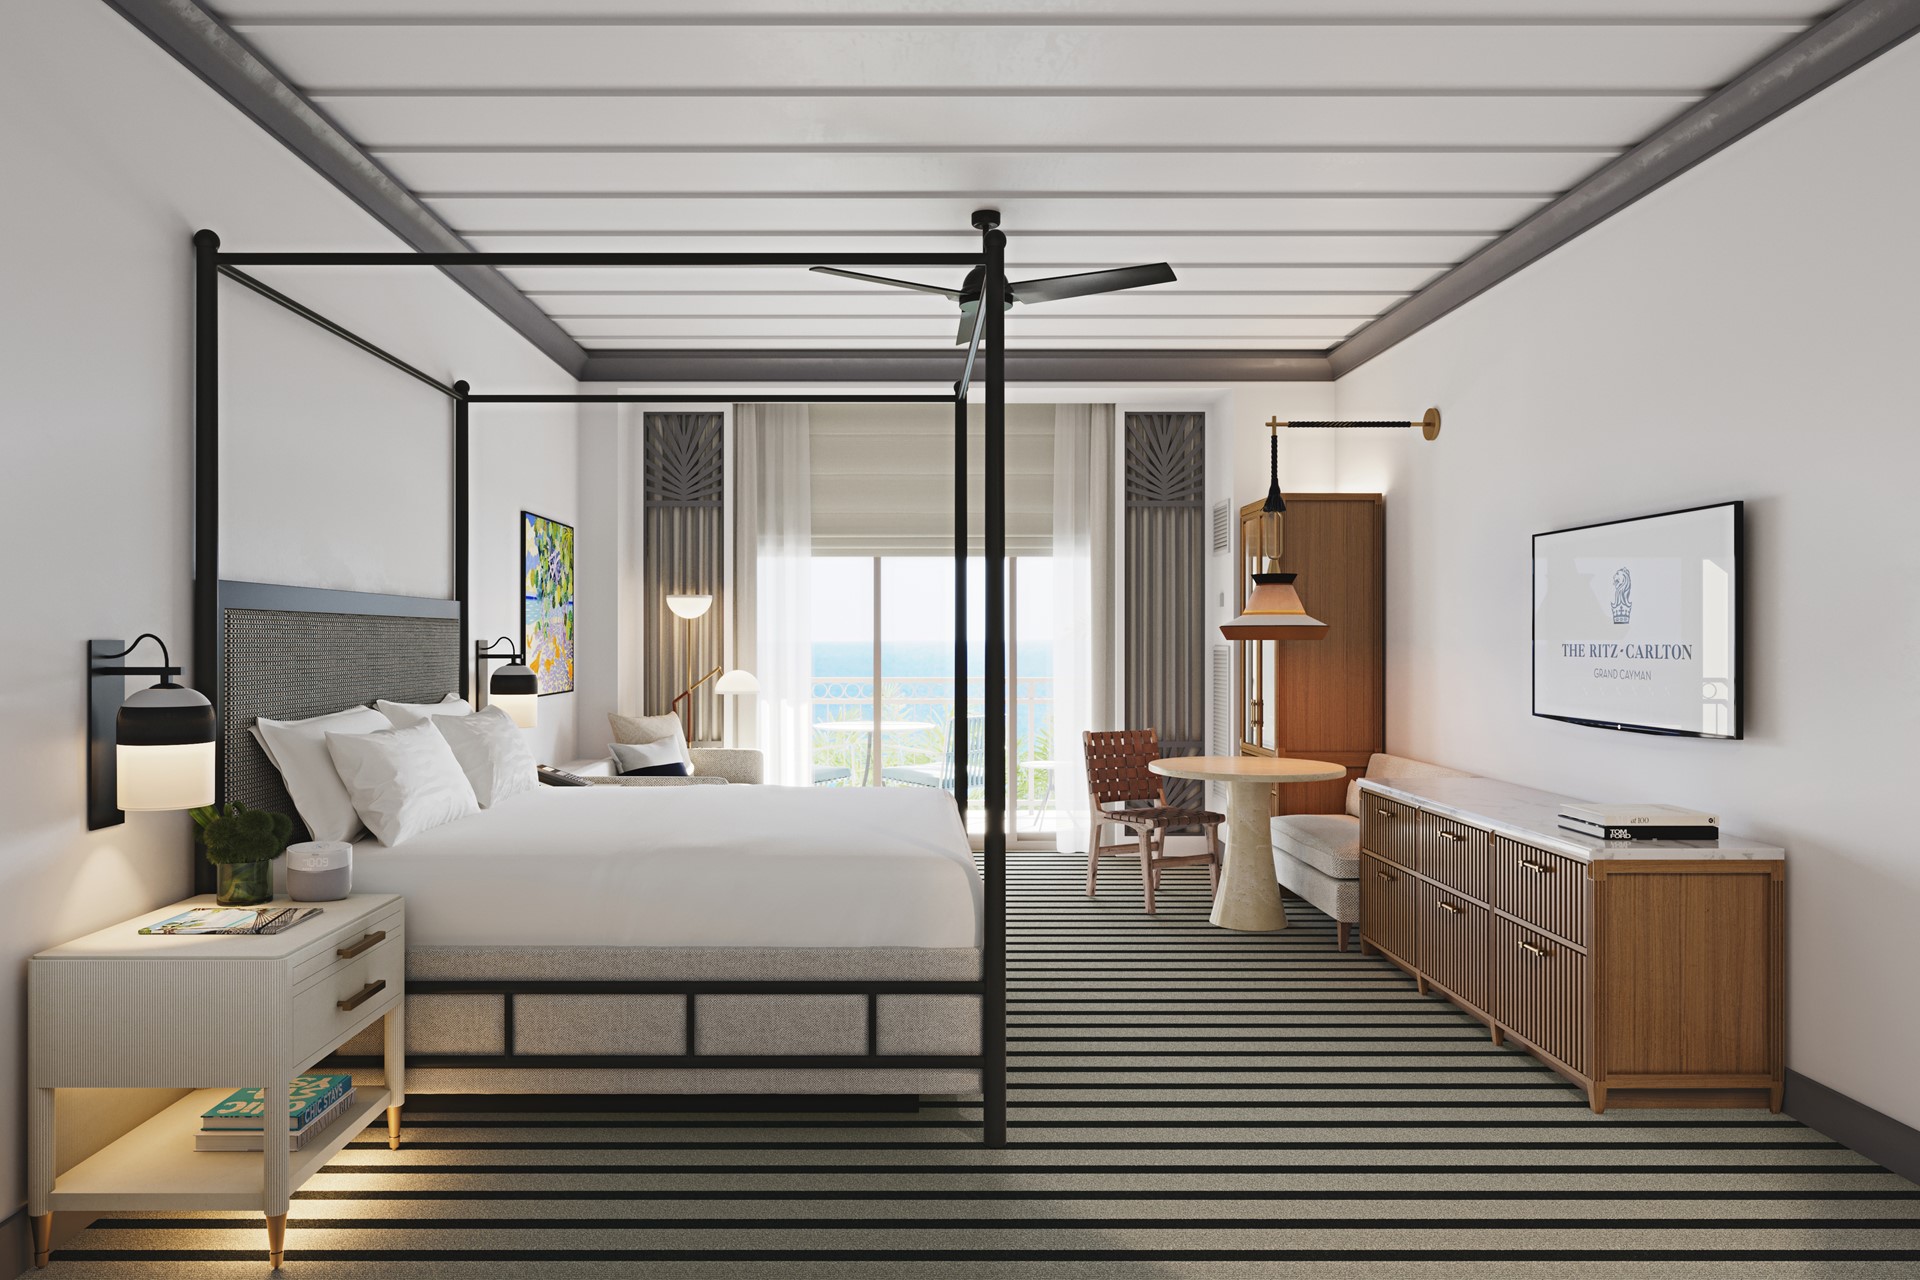 The Ritz-Carlton, Grand Cayman reopens renovated and refreshed